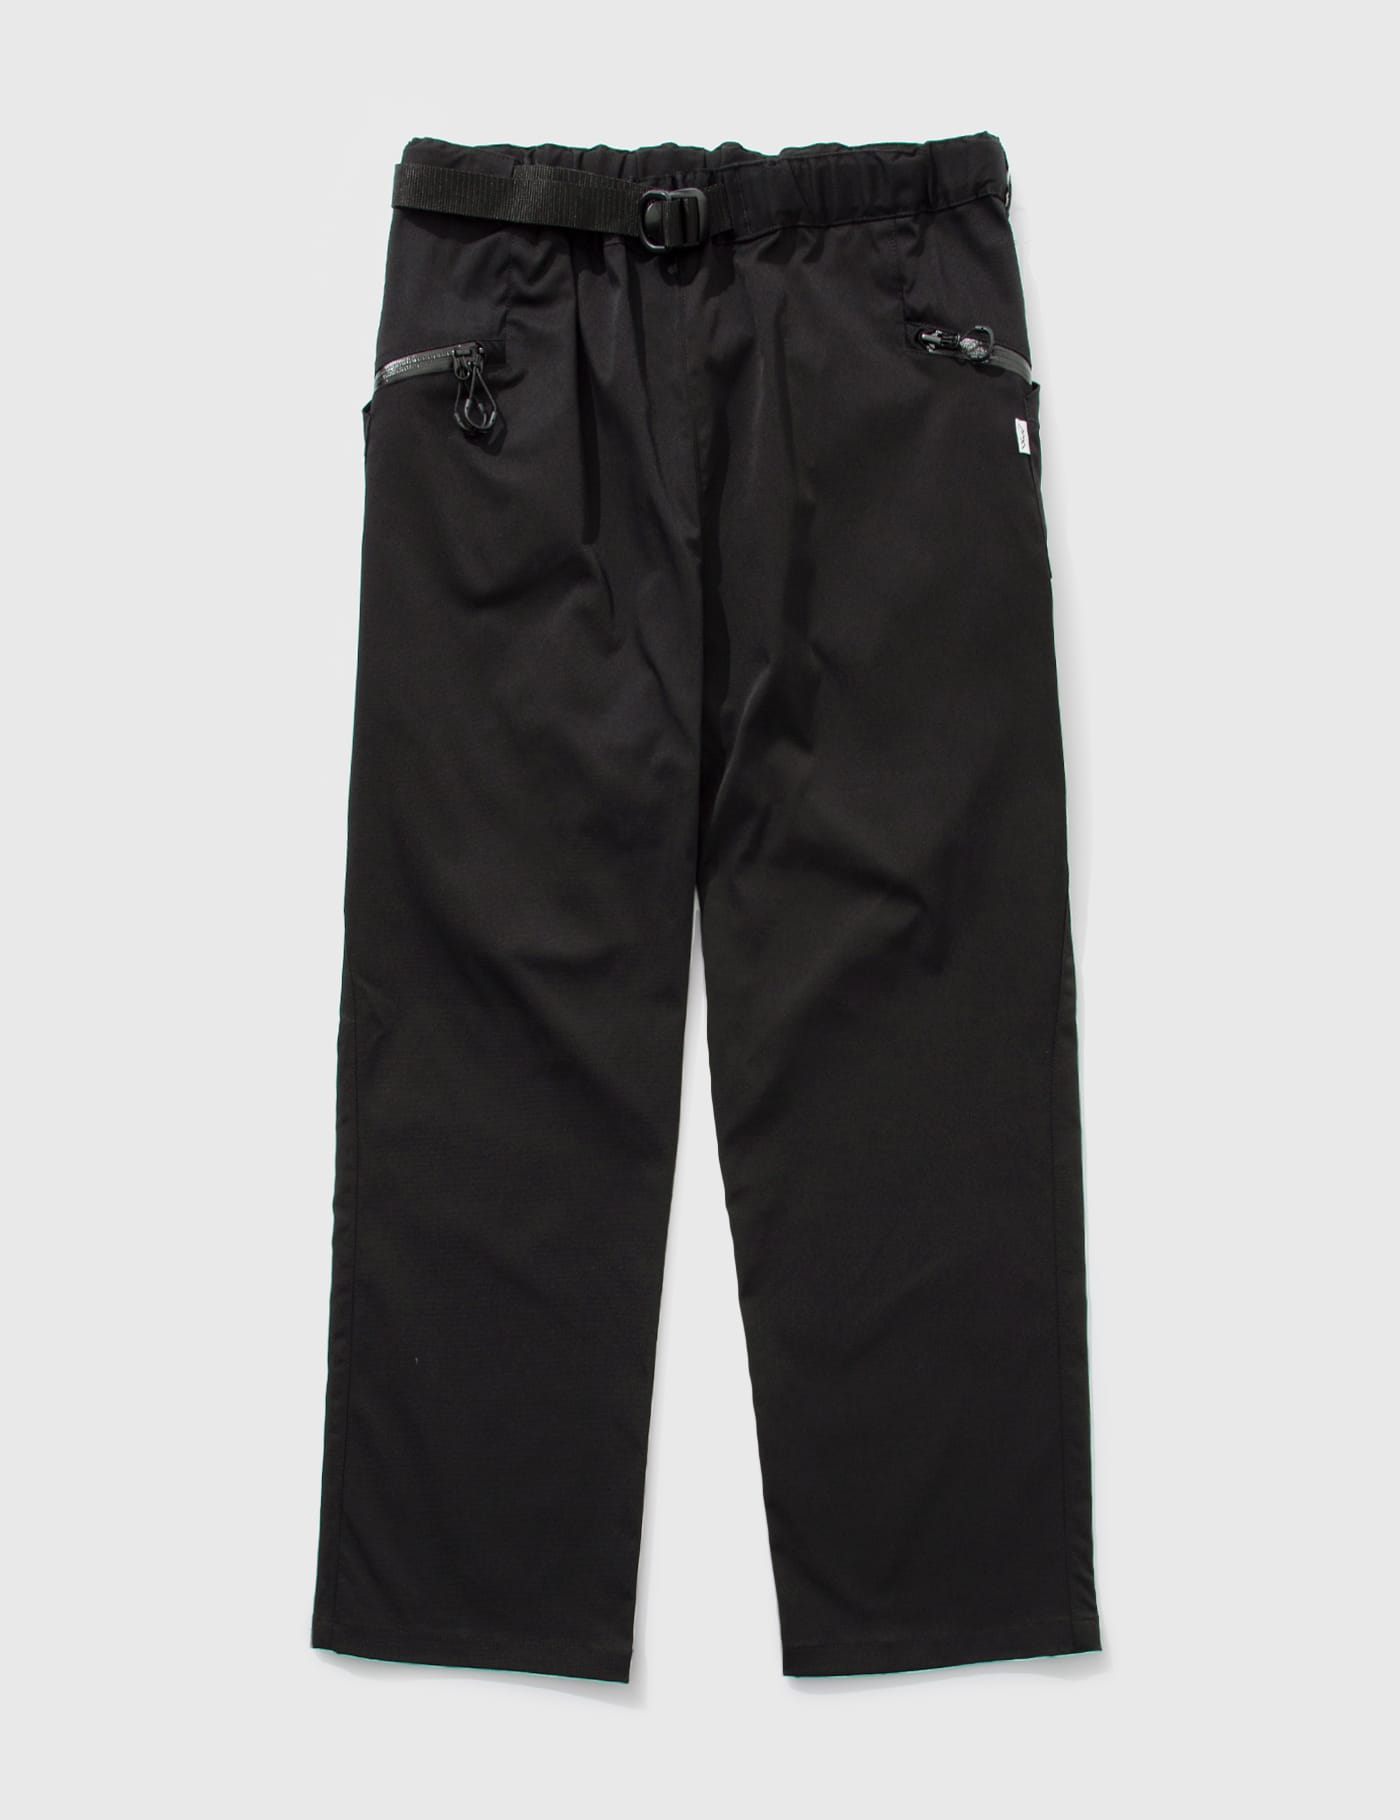 Comfy Outdoor Garment - Step Back Pants | HBX - Globally Curated 